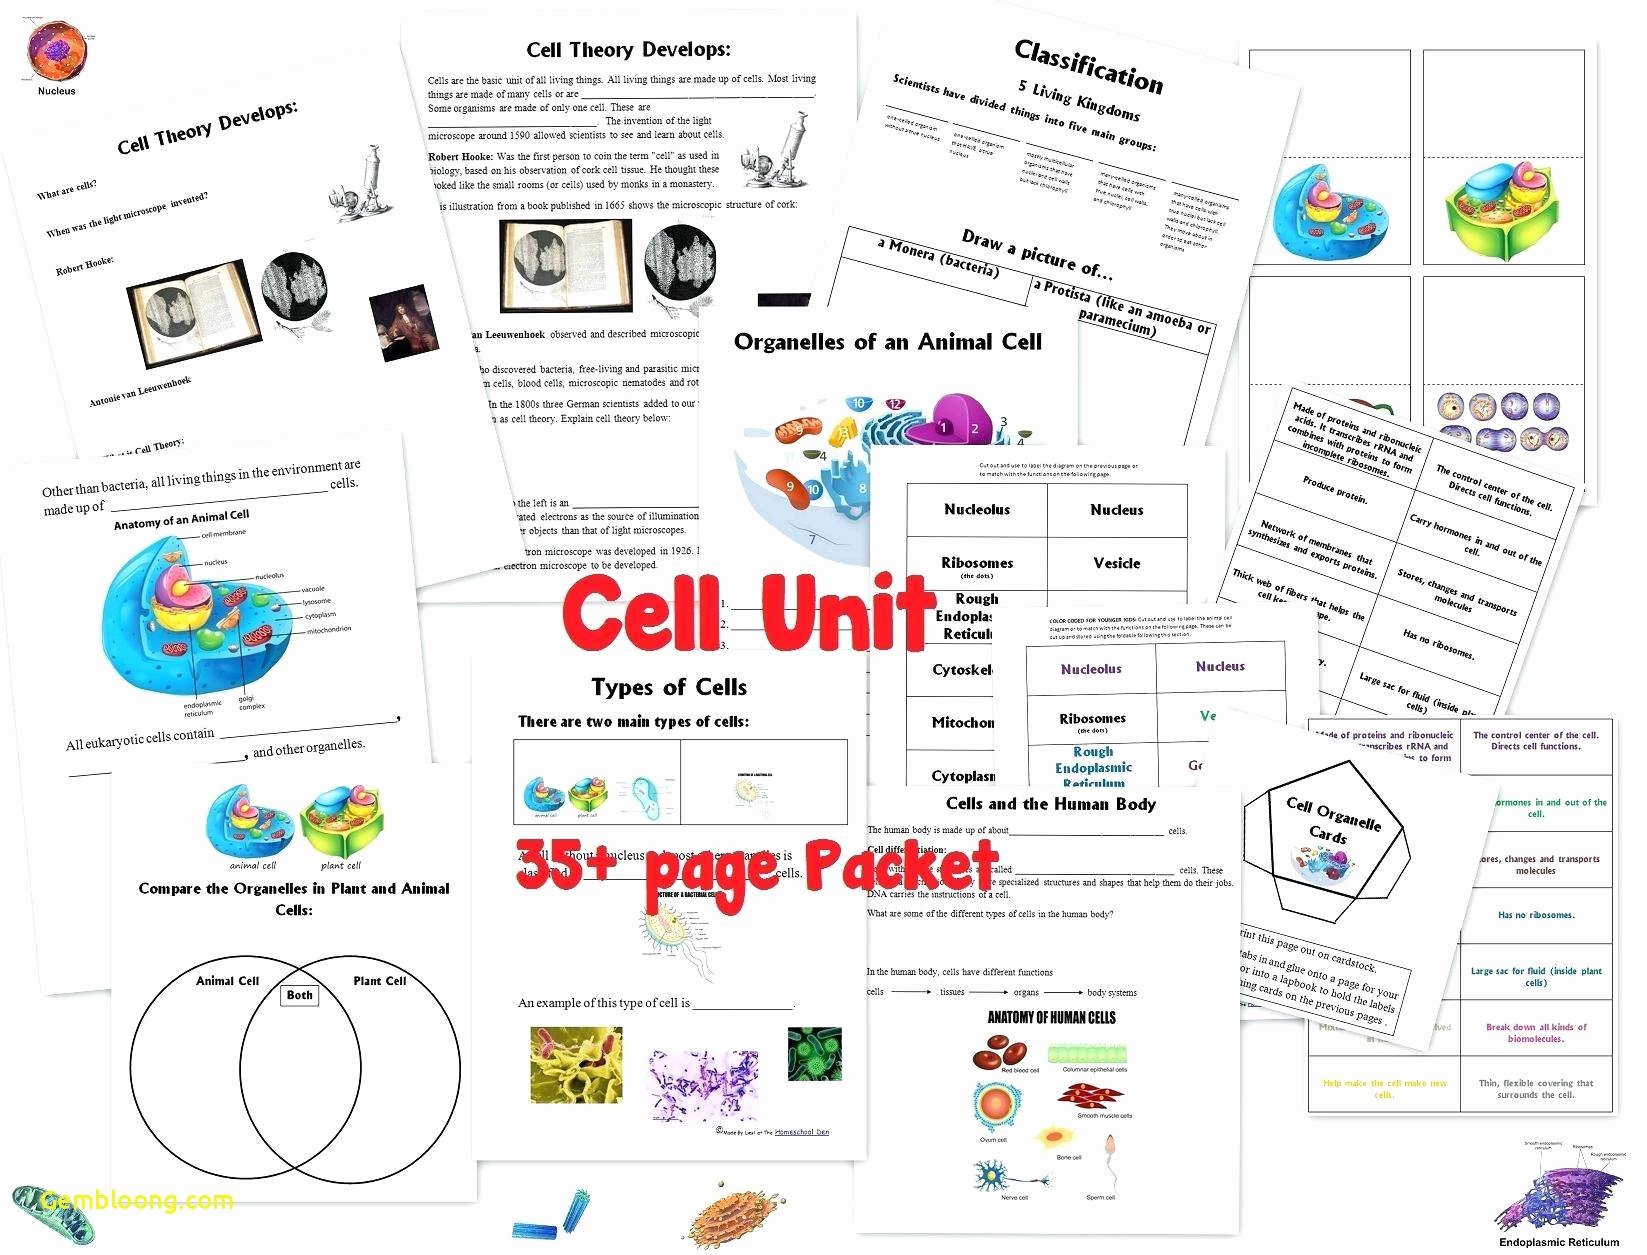 Cells and their organelles Worksheet Awesome Cell organelles Worksheet Cramerforcongress